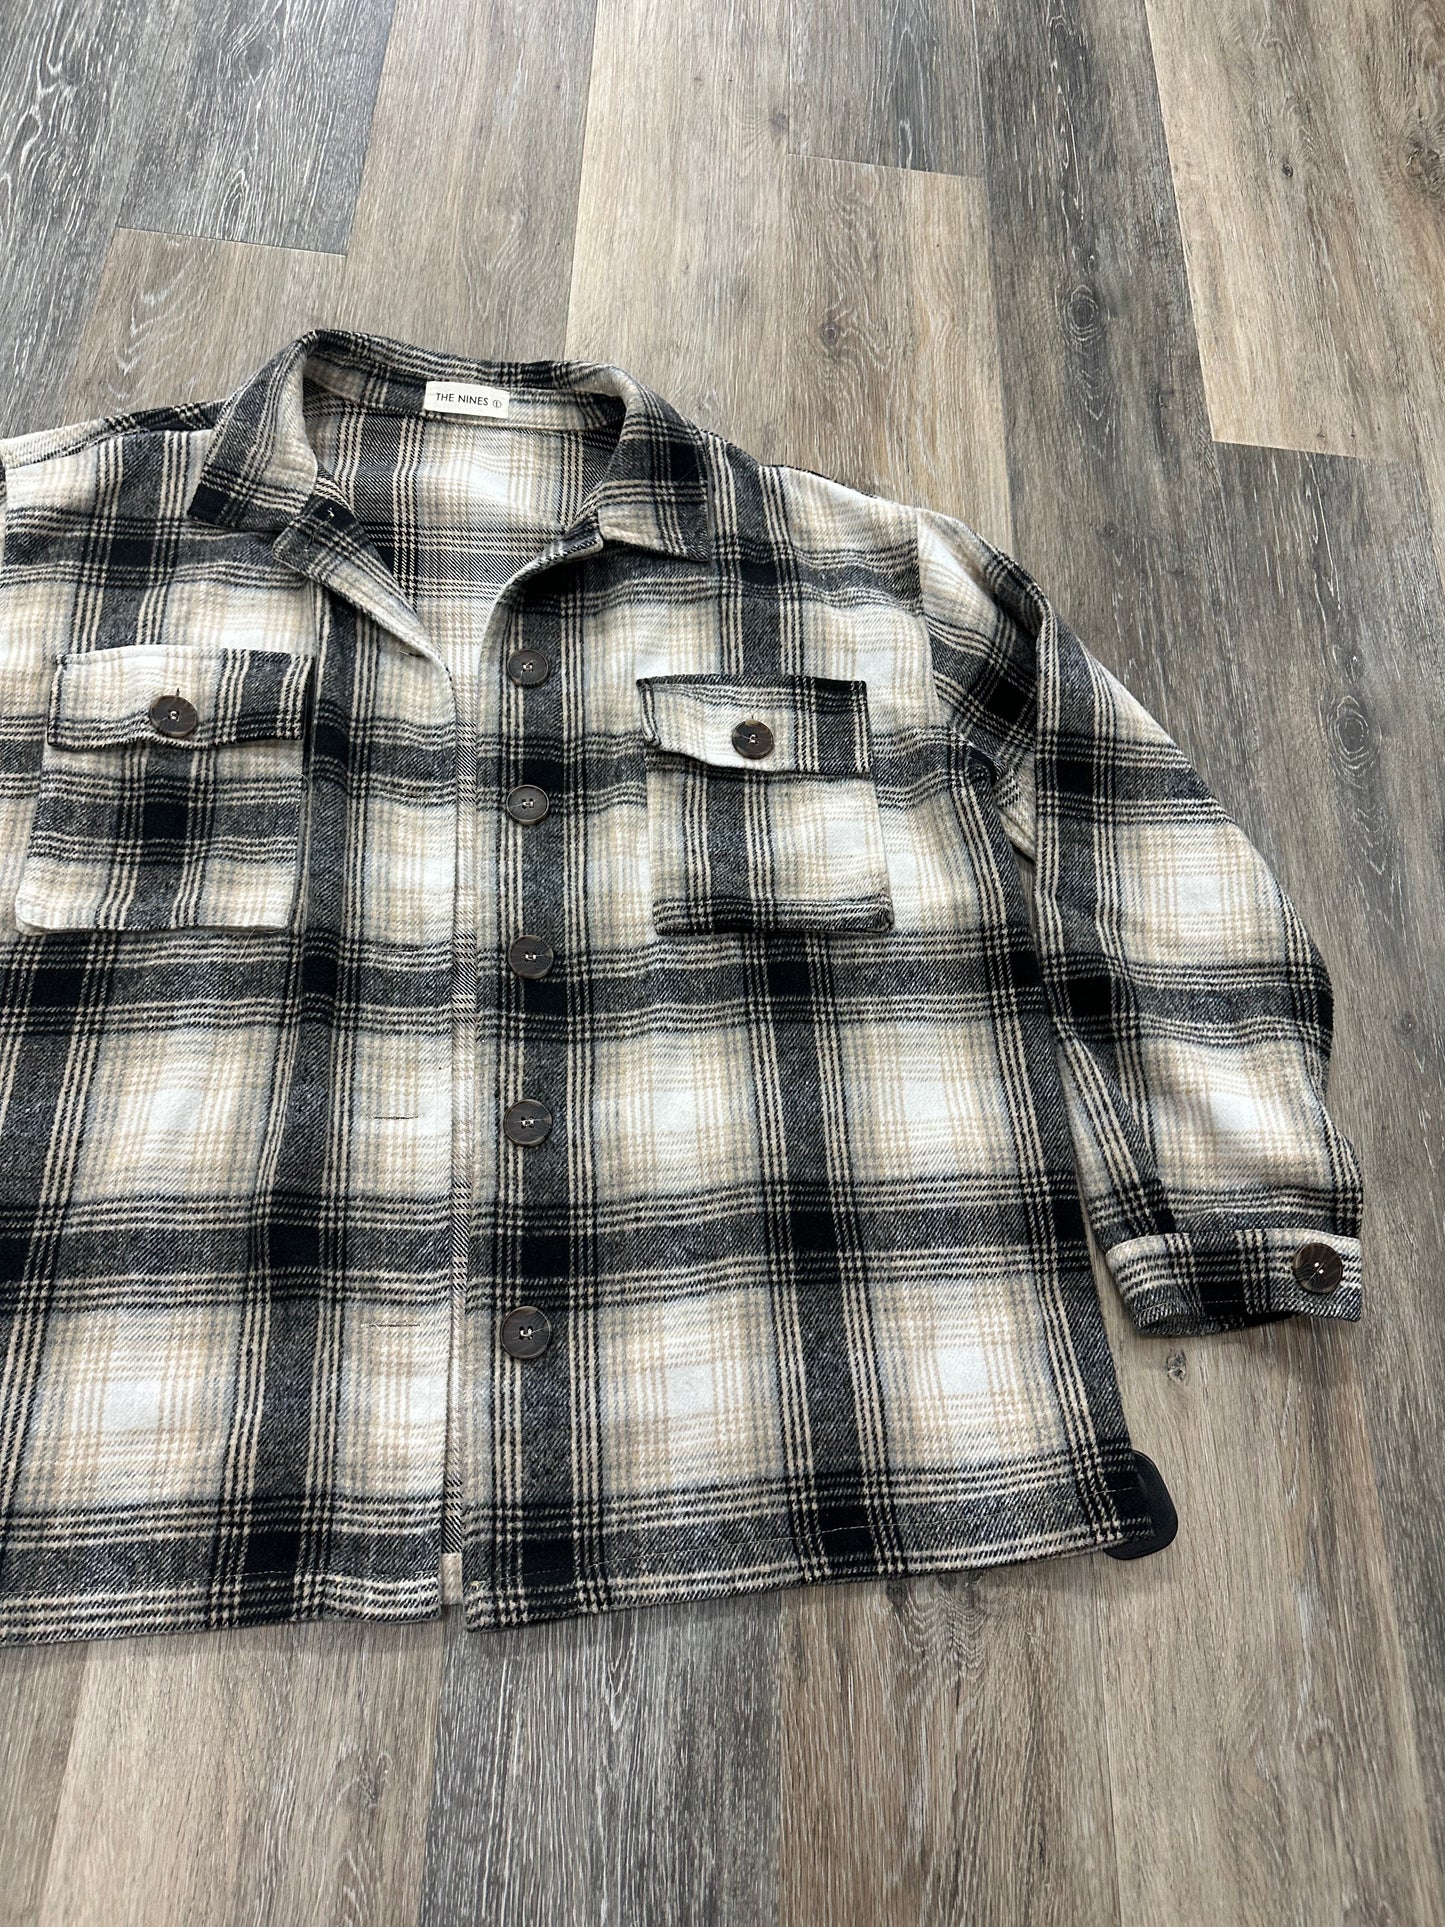 Jacket Shirt By The Nines  Size: L